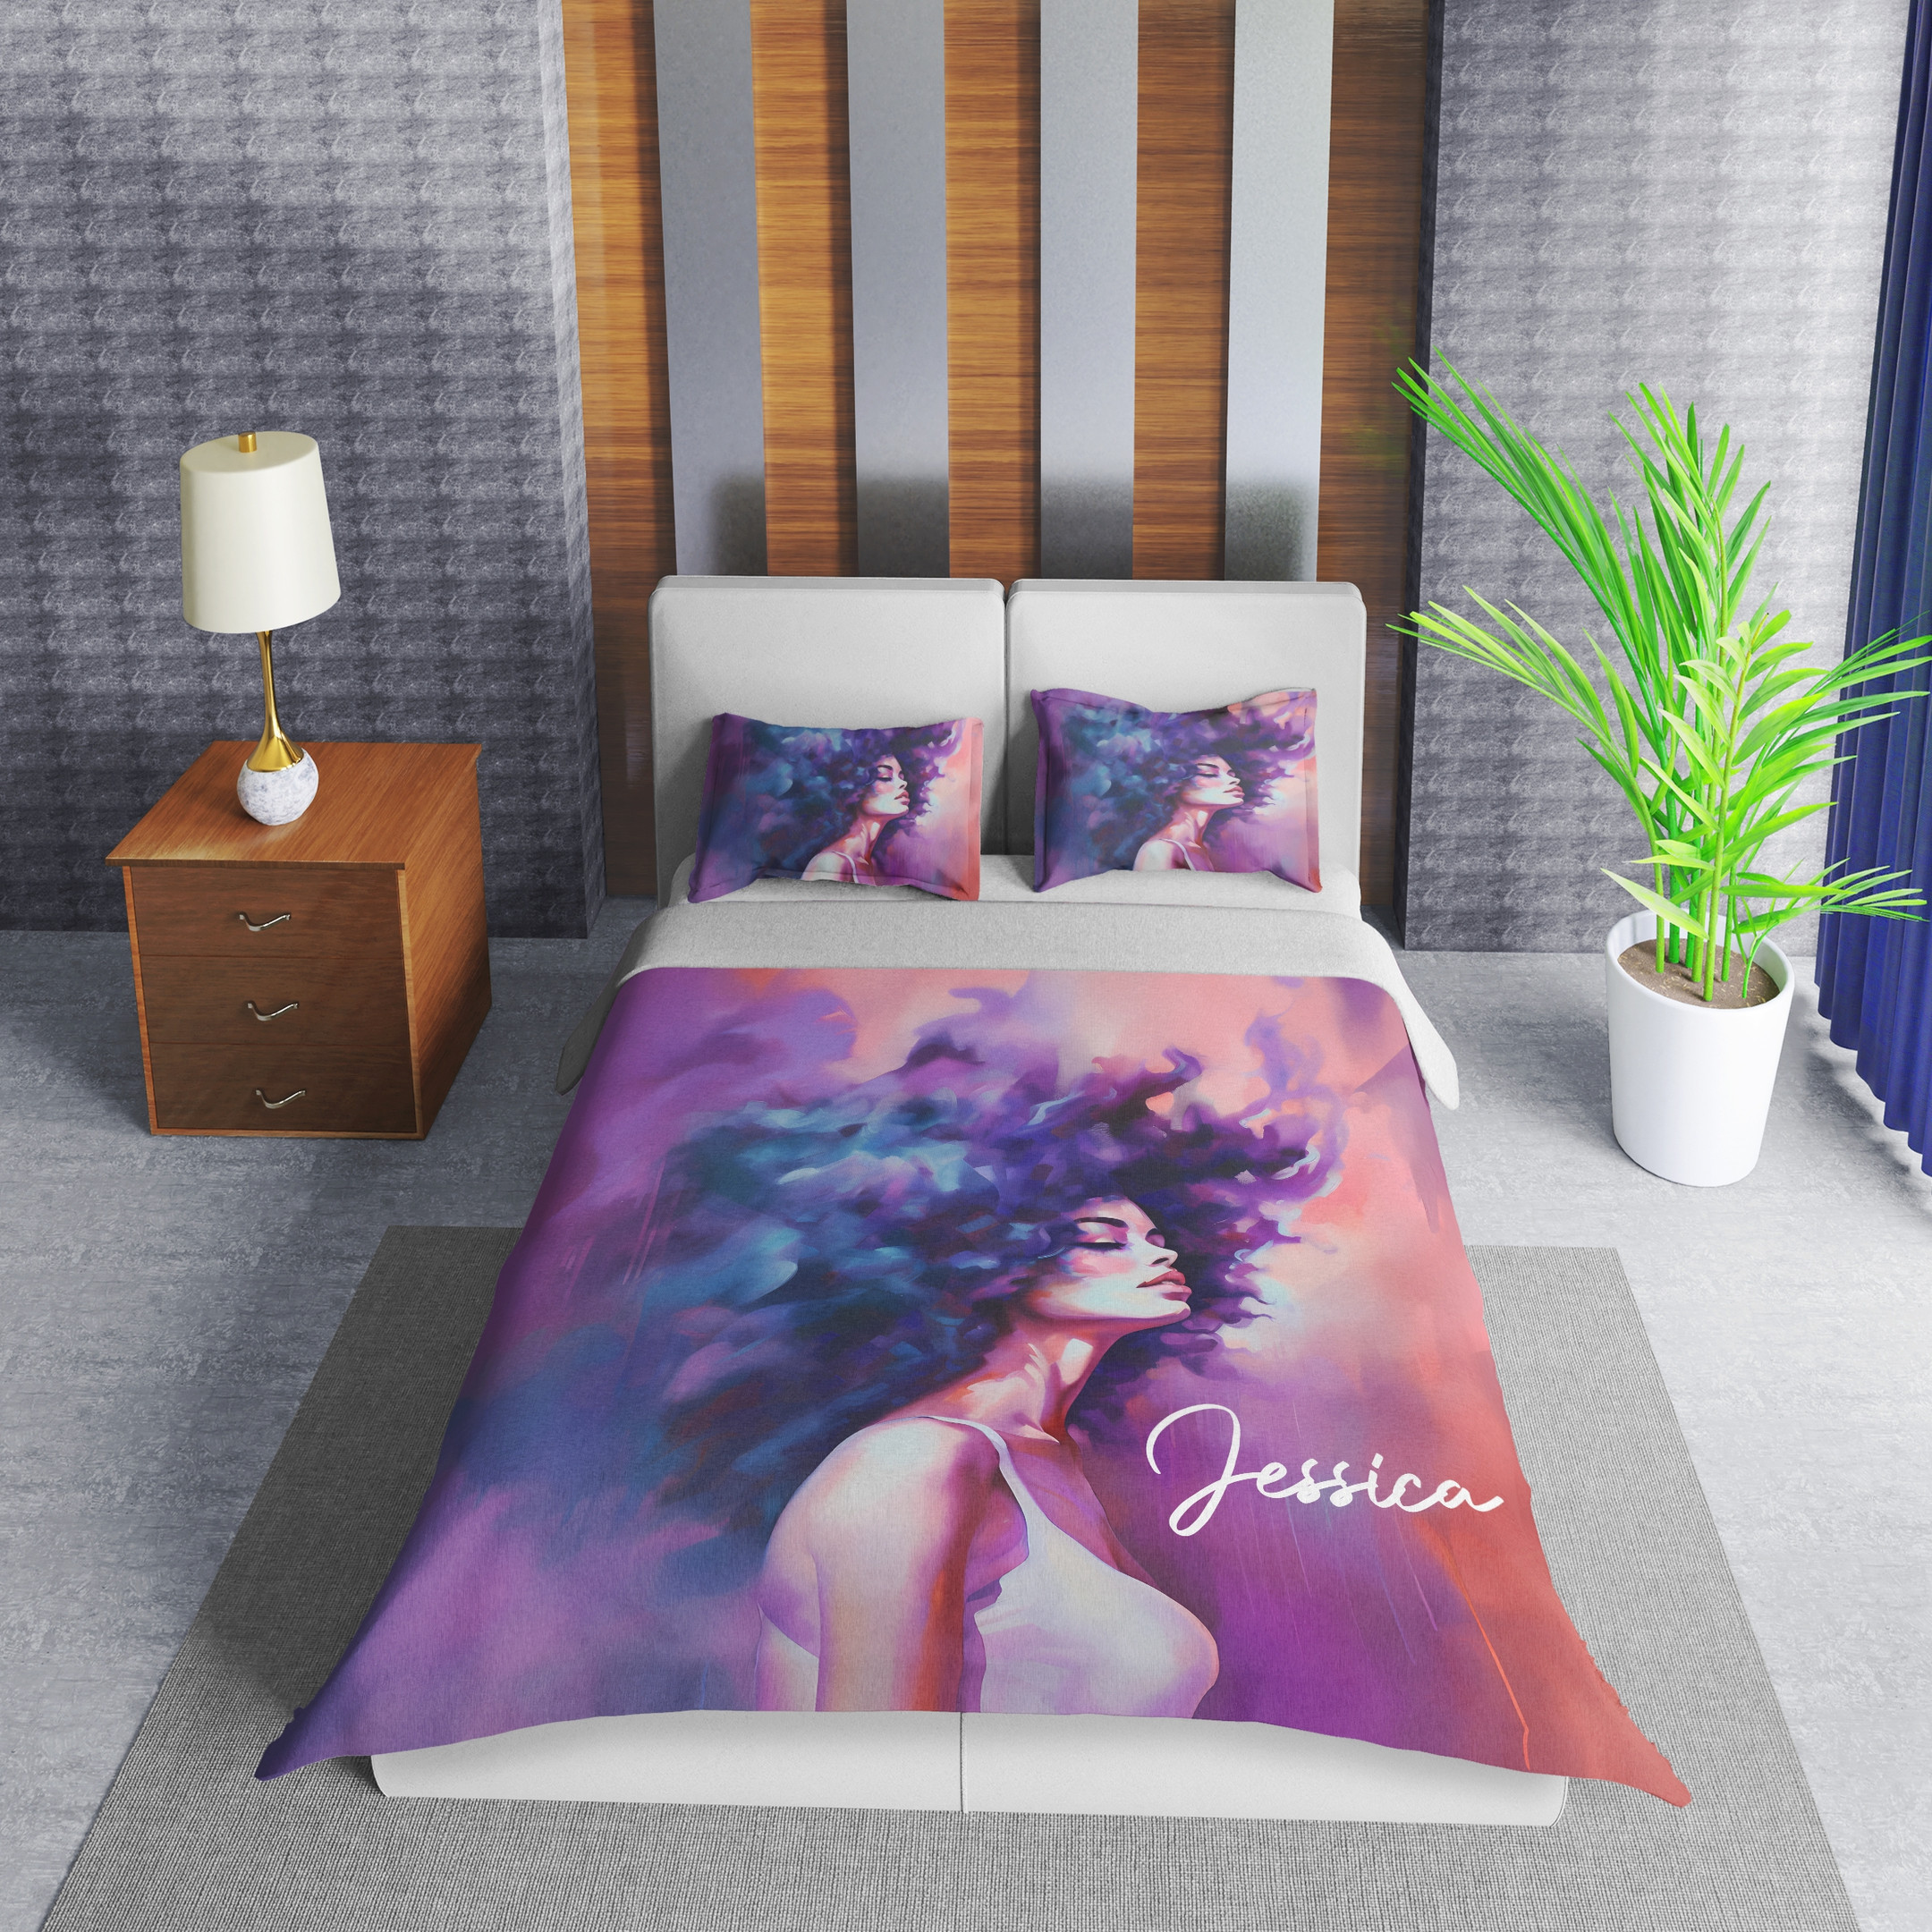 Personalized Black Girl With Afro Hair Aesthetic Color Duvet Cover Bedding Set